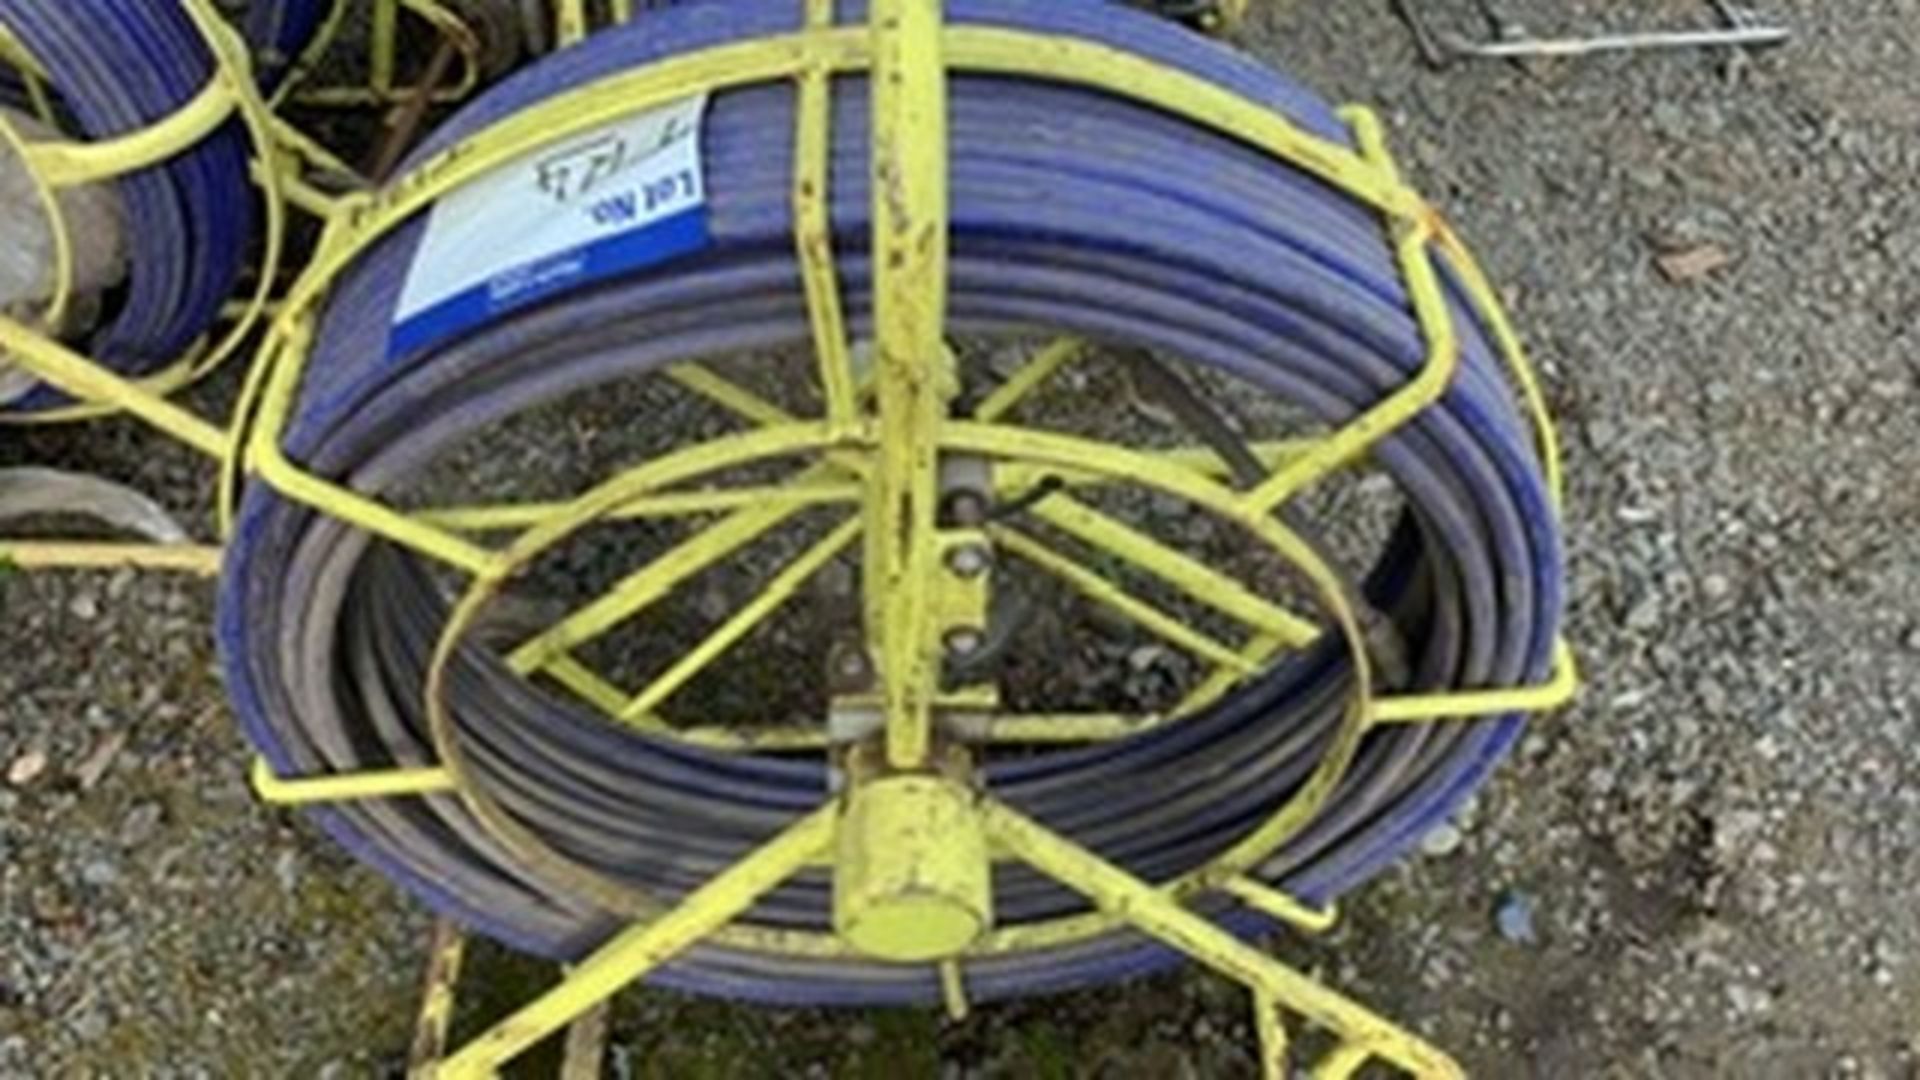 OPTICAL DRAINAGE INSPECTION CABLE ON REEL - Image 2 of 2